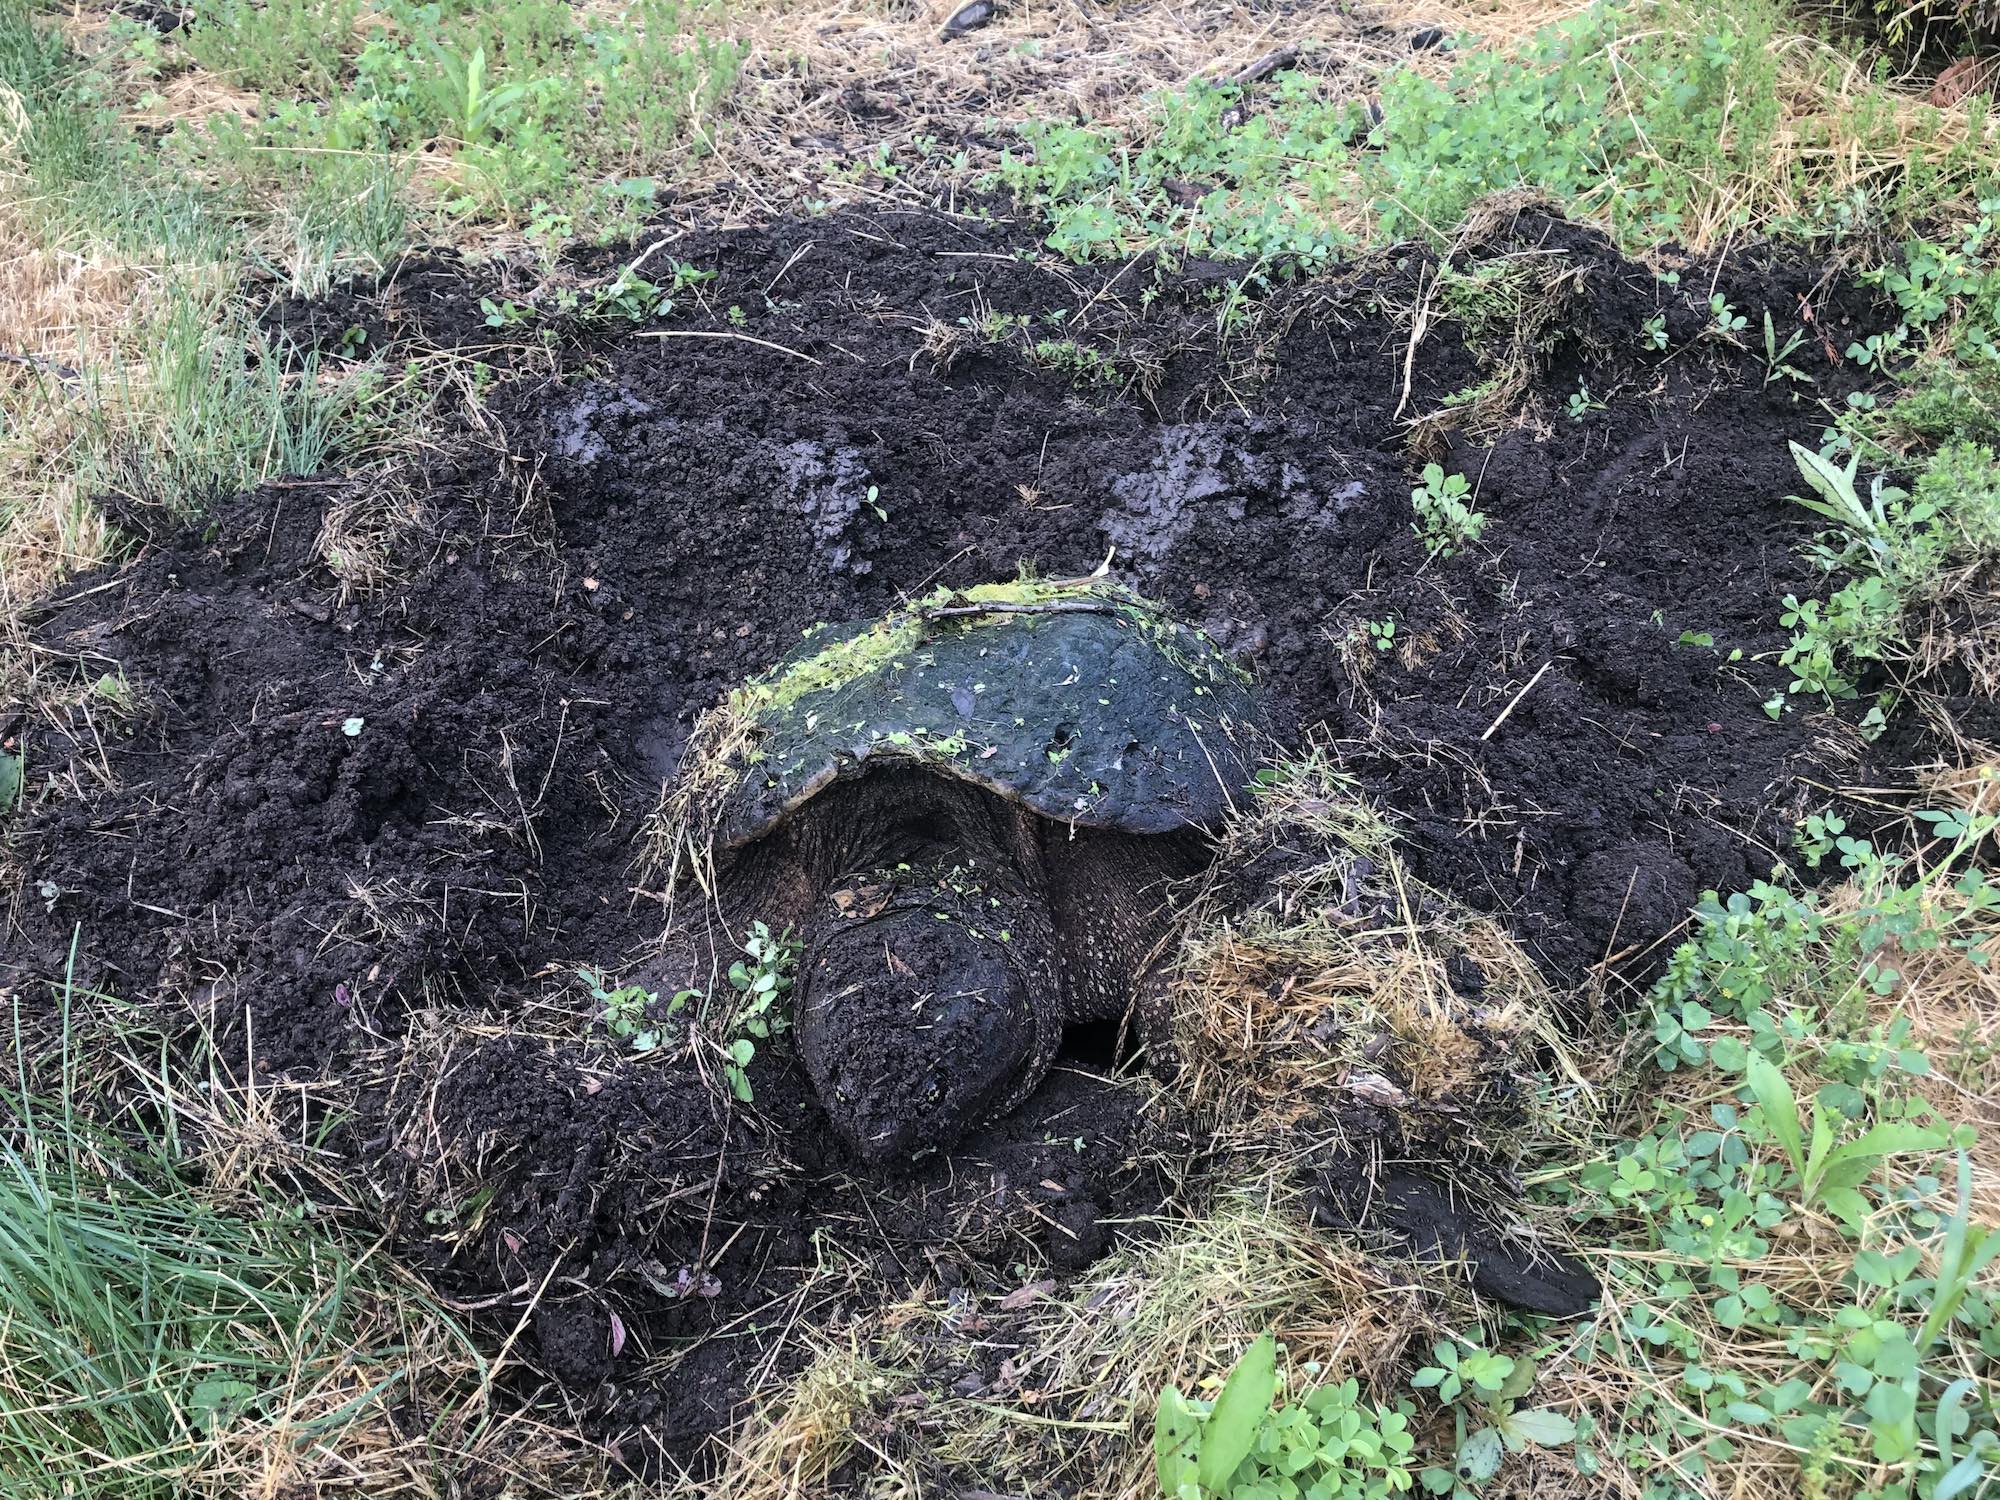 Snapping Turtle laying eggs in E. Ray Stevens Pond and Aquatic Gardens on corner of Manitou Way and Nakoma Road in Madison, Wisconsin on June 10, 2020.